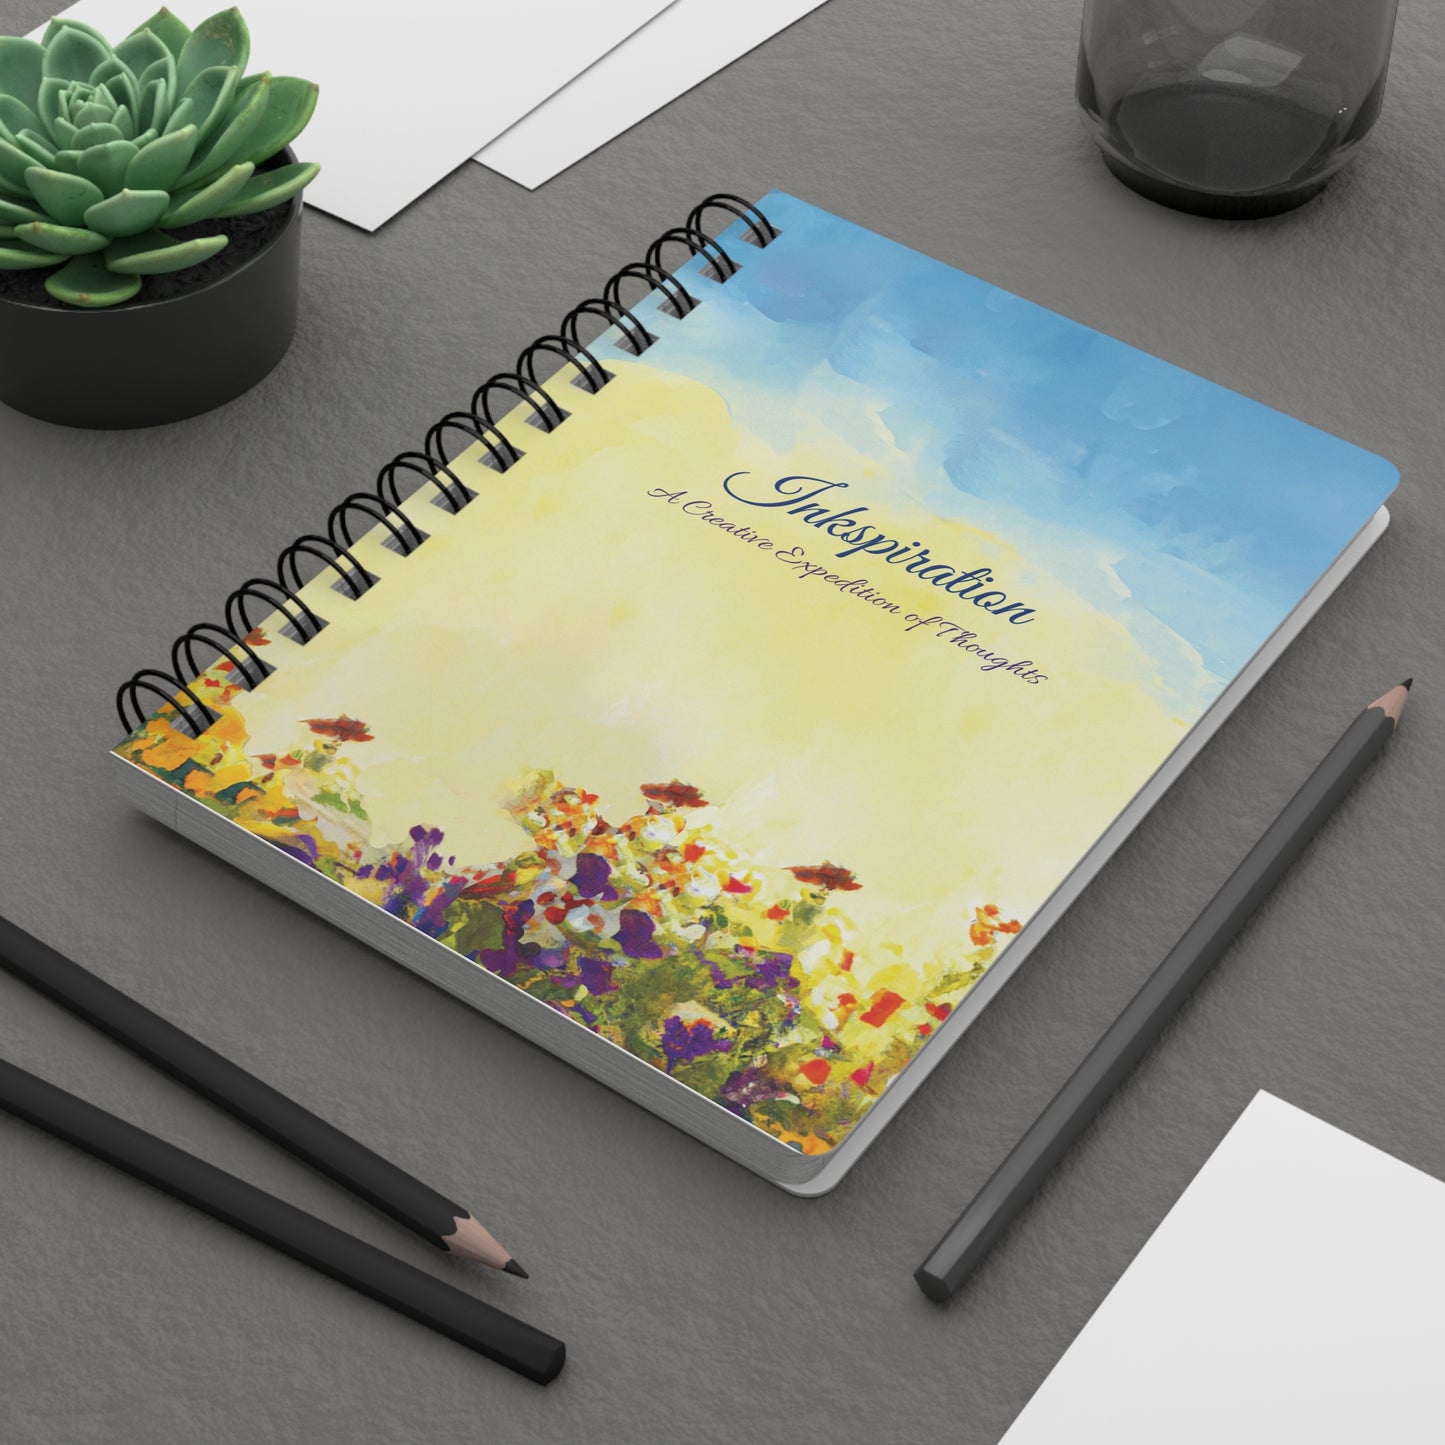 Inkspiration: A Creative Expedition of Thoughts" Spiral Bound Journal & Notebooks with 2023 -2024 Year-at-a-glance calendar